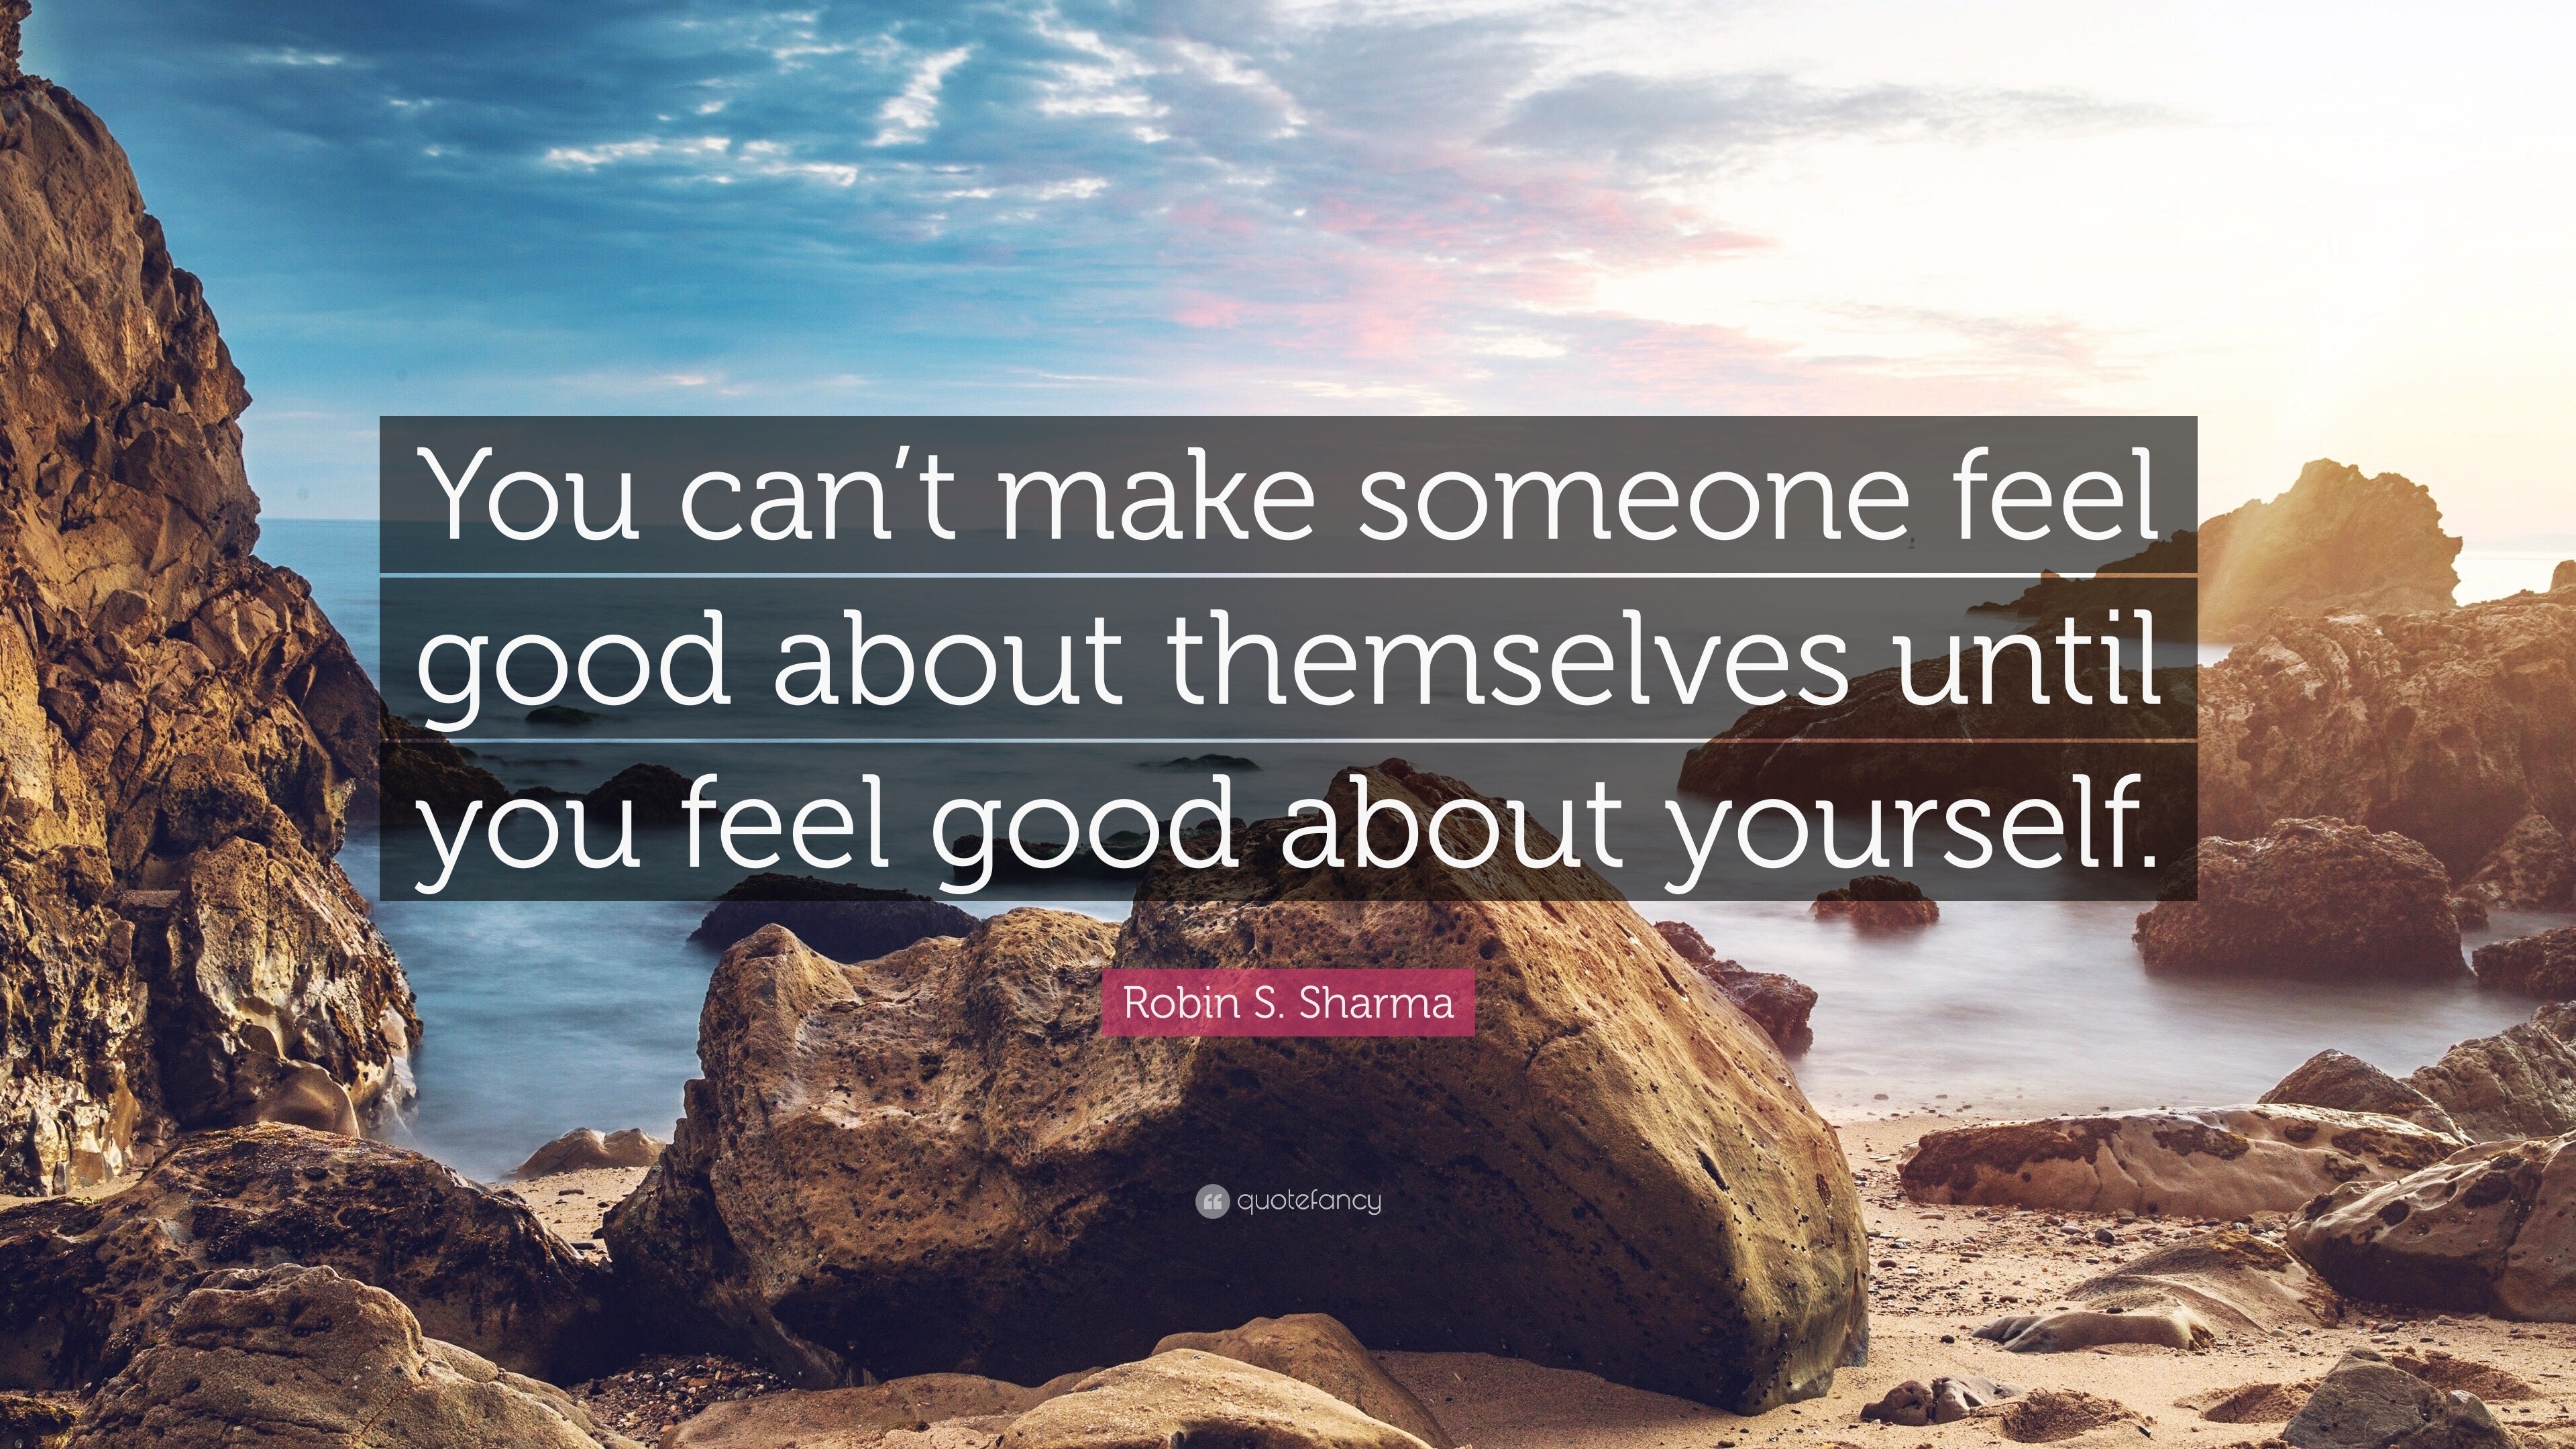 1706297 Robin S Sharma Quote You can t make someone feel good about